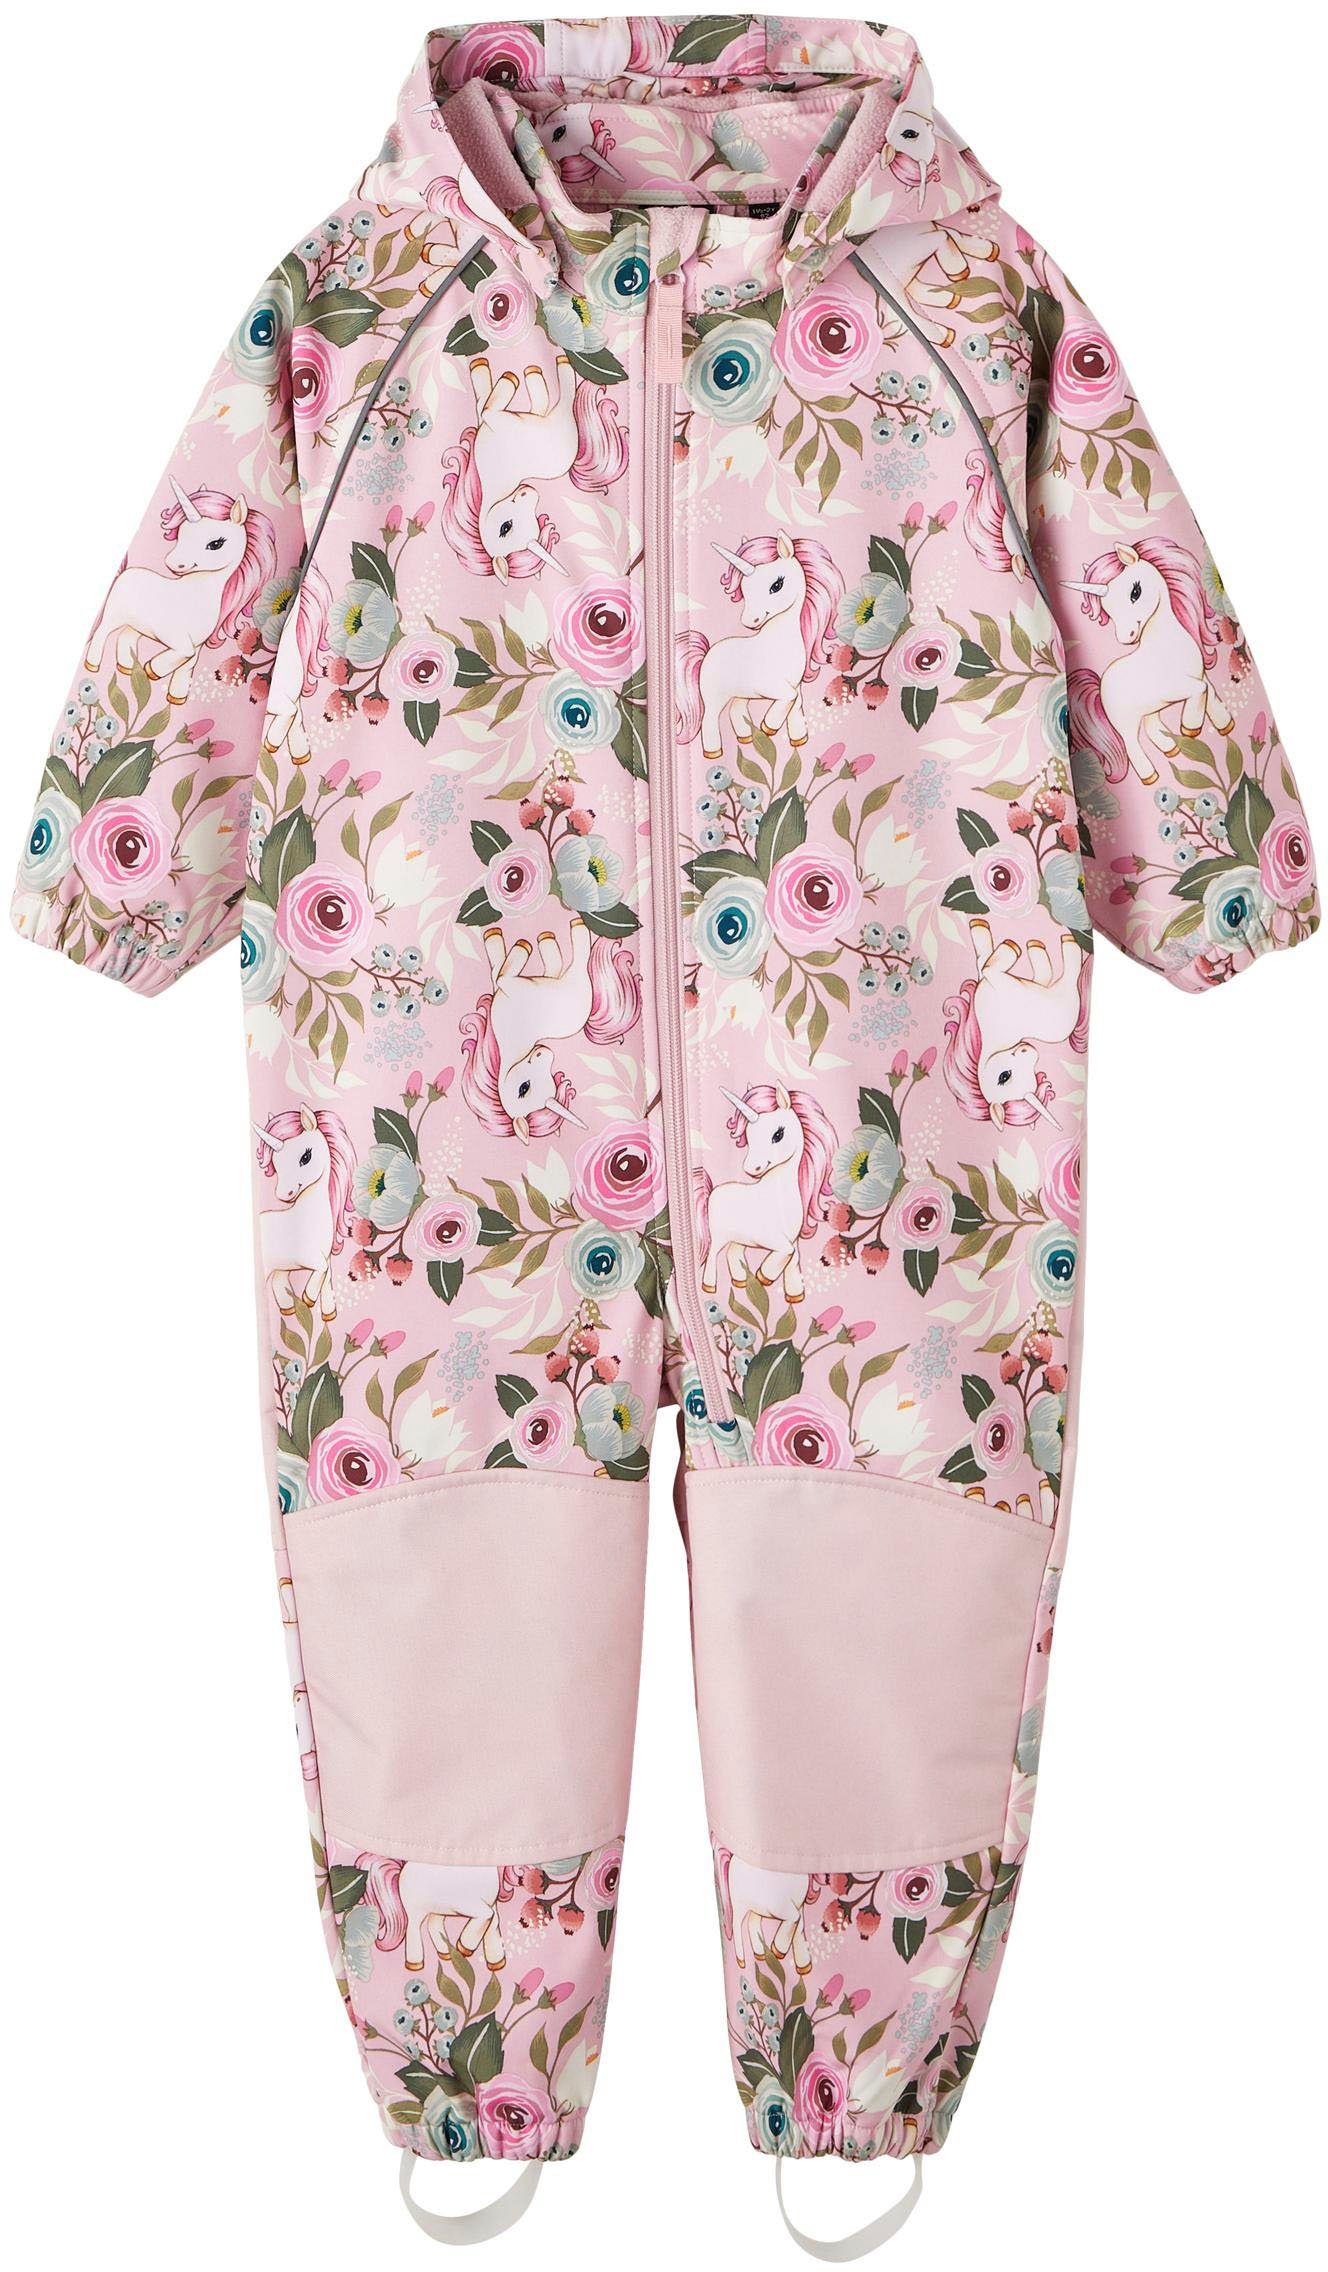 2FO It Softshelloverall FLORAL nectar Name pink NOOS NMFALFA SUIT